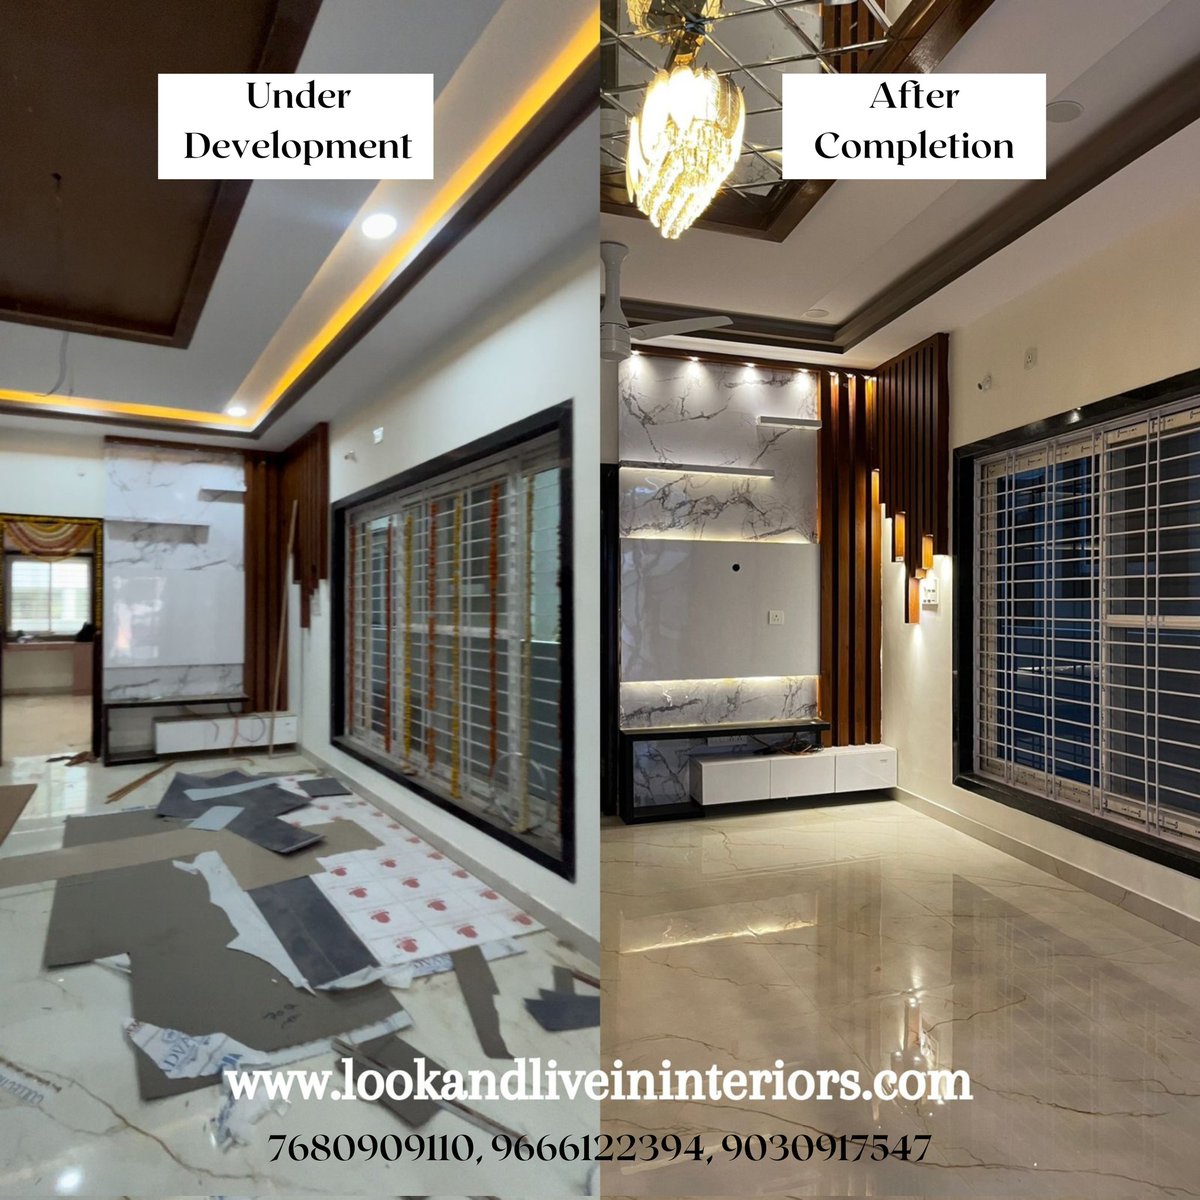 The potential was there, we just need to unlock it! See how @lookandlivein Interiors brought this space a life #interiores #italiandesign #interiordesign #interiorstyling #interiorstyling #homeinterior #homeinteriors #homedecor #homedesign #hyderabadinteriorsdesigners #interiors